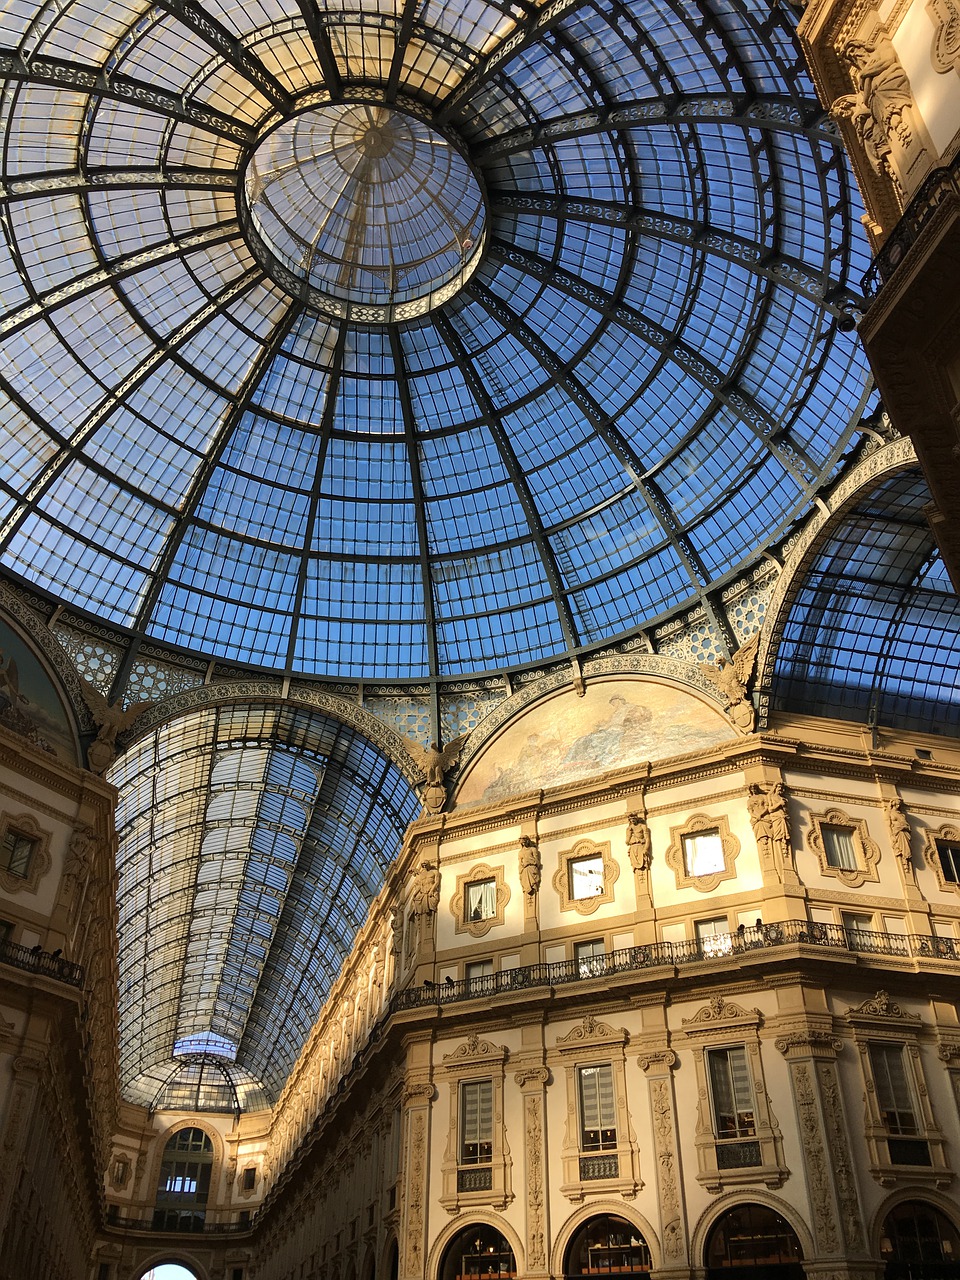 milan  commercial gallery  architecture free photo